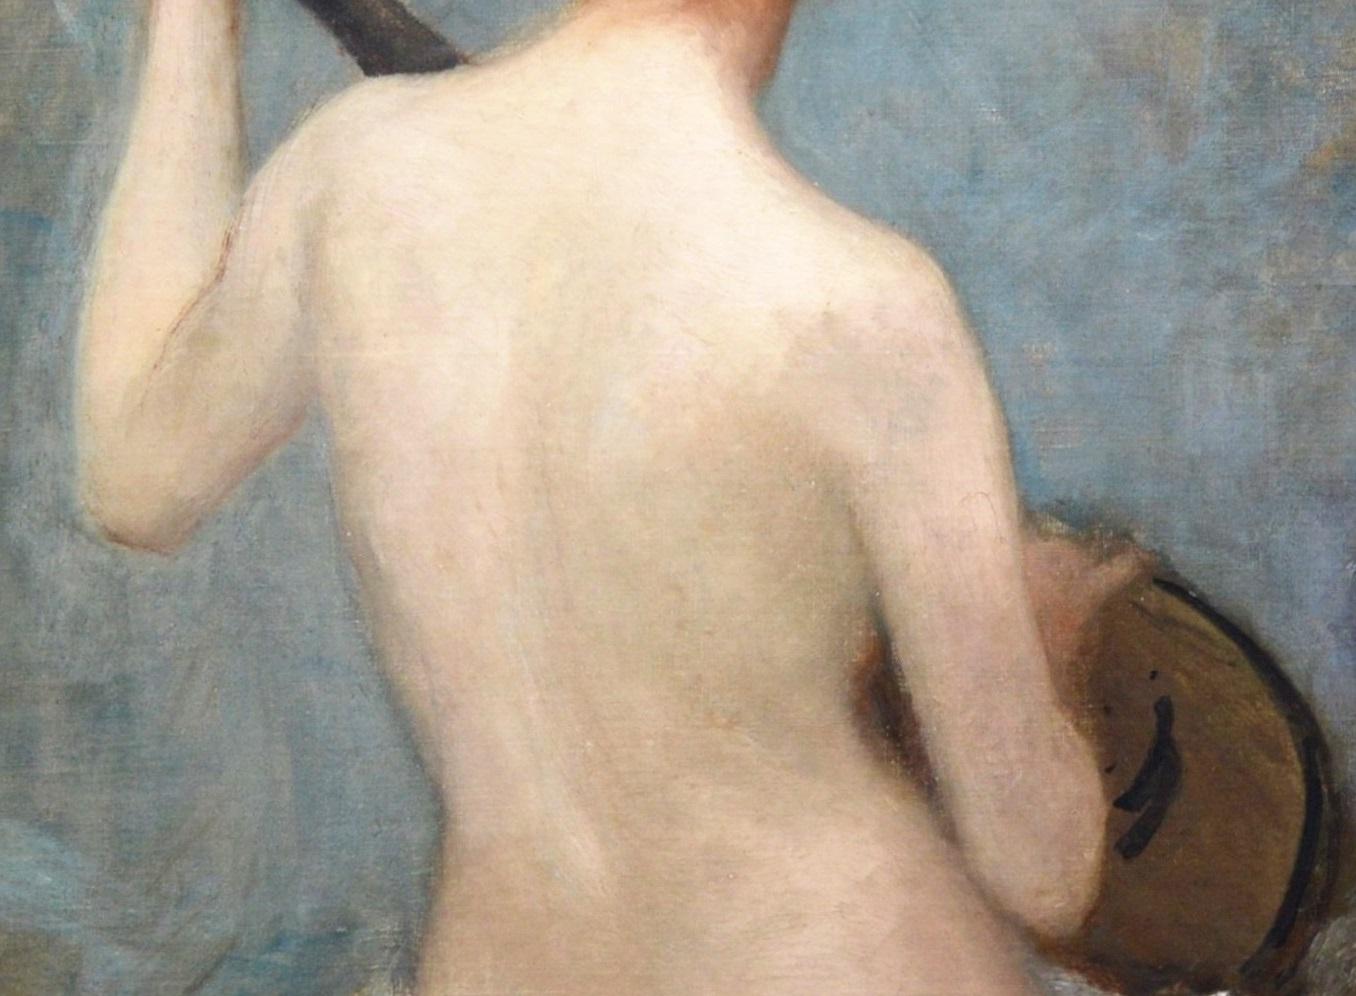 The Lute Player - 19th Century French Impressionist Nude Portrait Oil Painting - Gray Portrait Painting by Jacques Martin